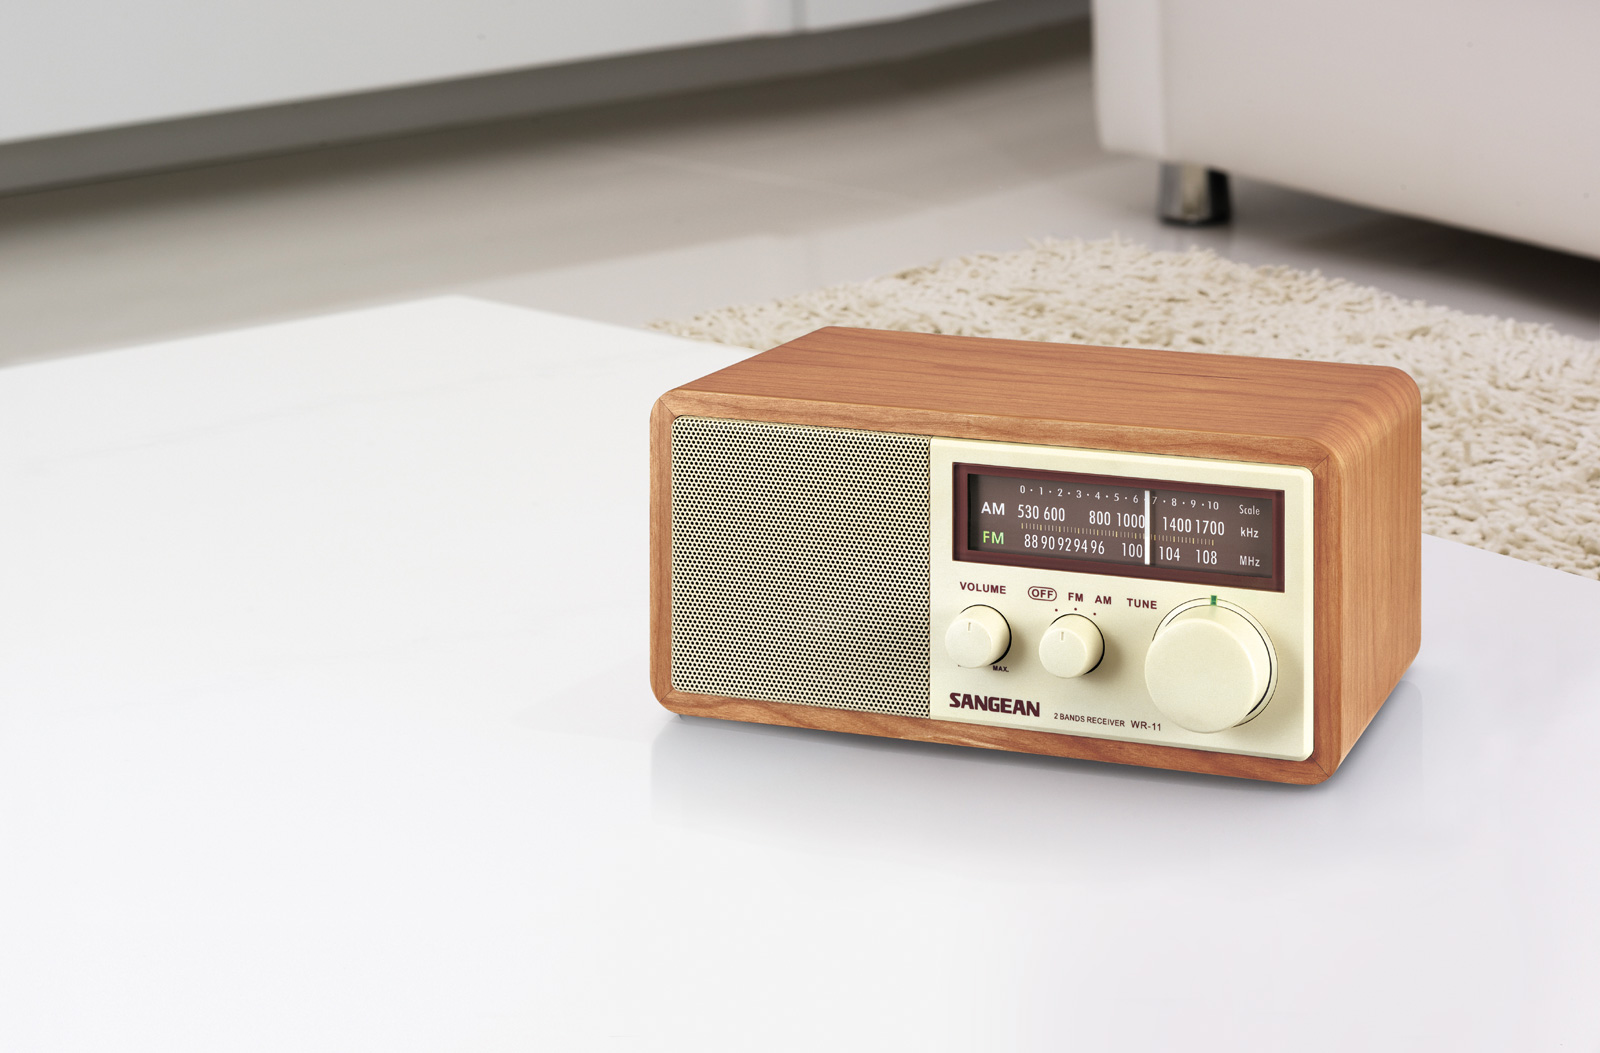 Sangean AM FM Aux Wooden Cabinet Table Top Radio with AUX Input - image 2 of 4